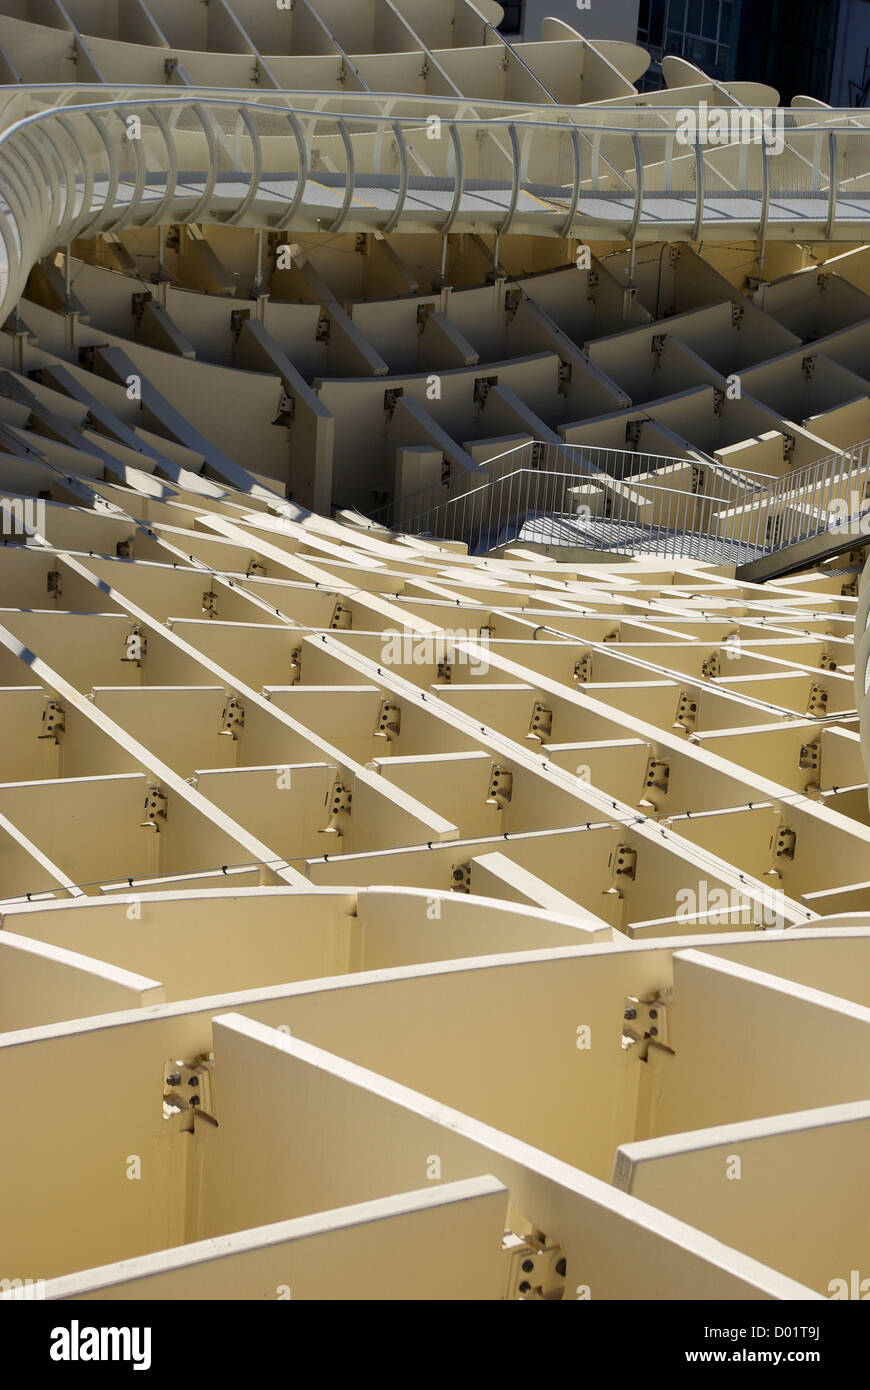 The viewing deck of the Metropol Parasol in Seville, Andalusia, Spain Stock Photo